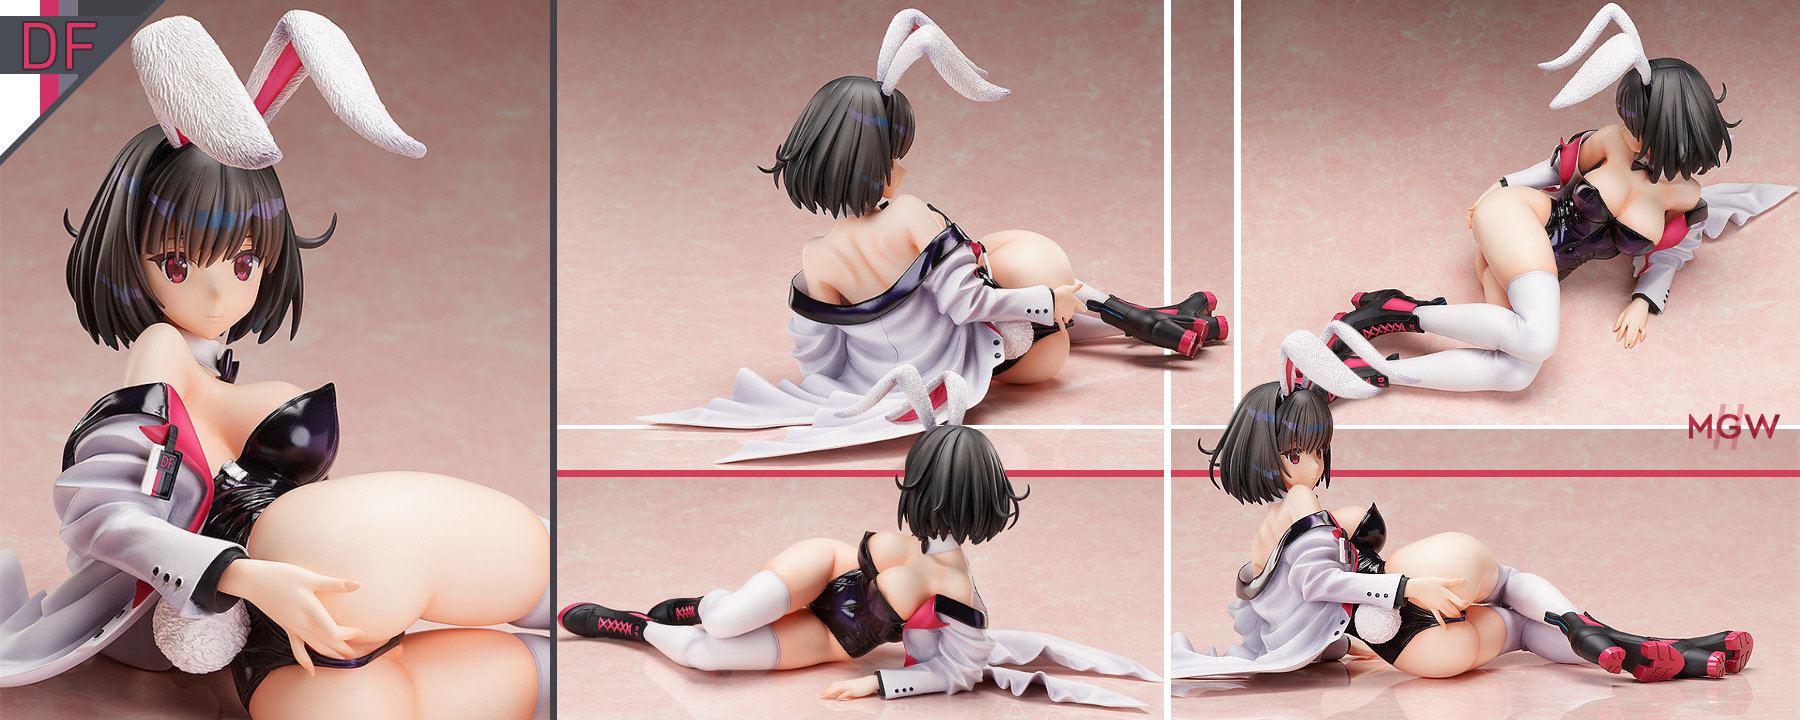 DF Kelly Bunny Ver. by FREEing illustrated by saitom MyGrailWatch Anime Figure Guide